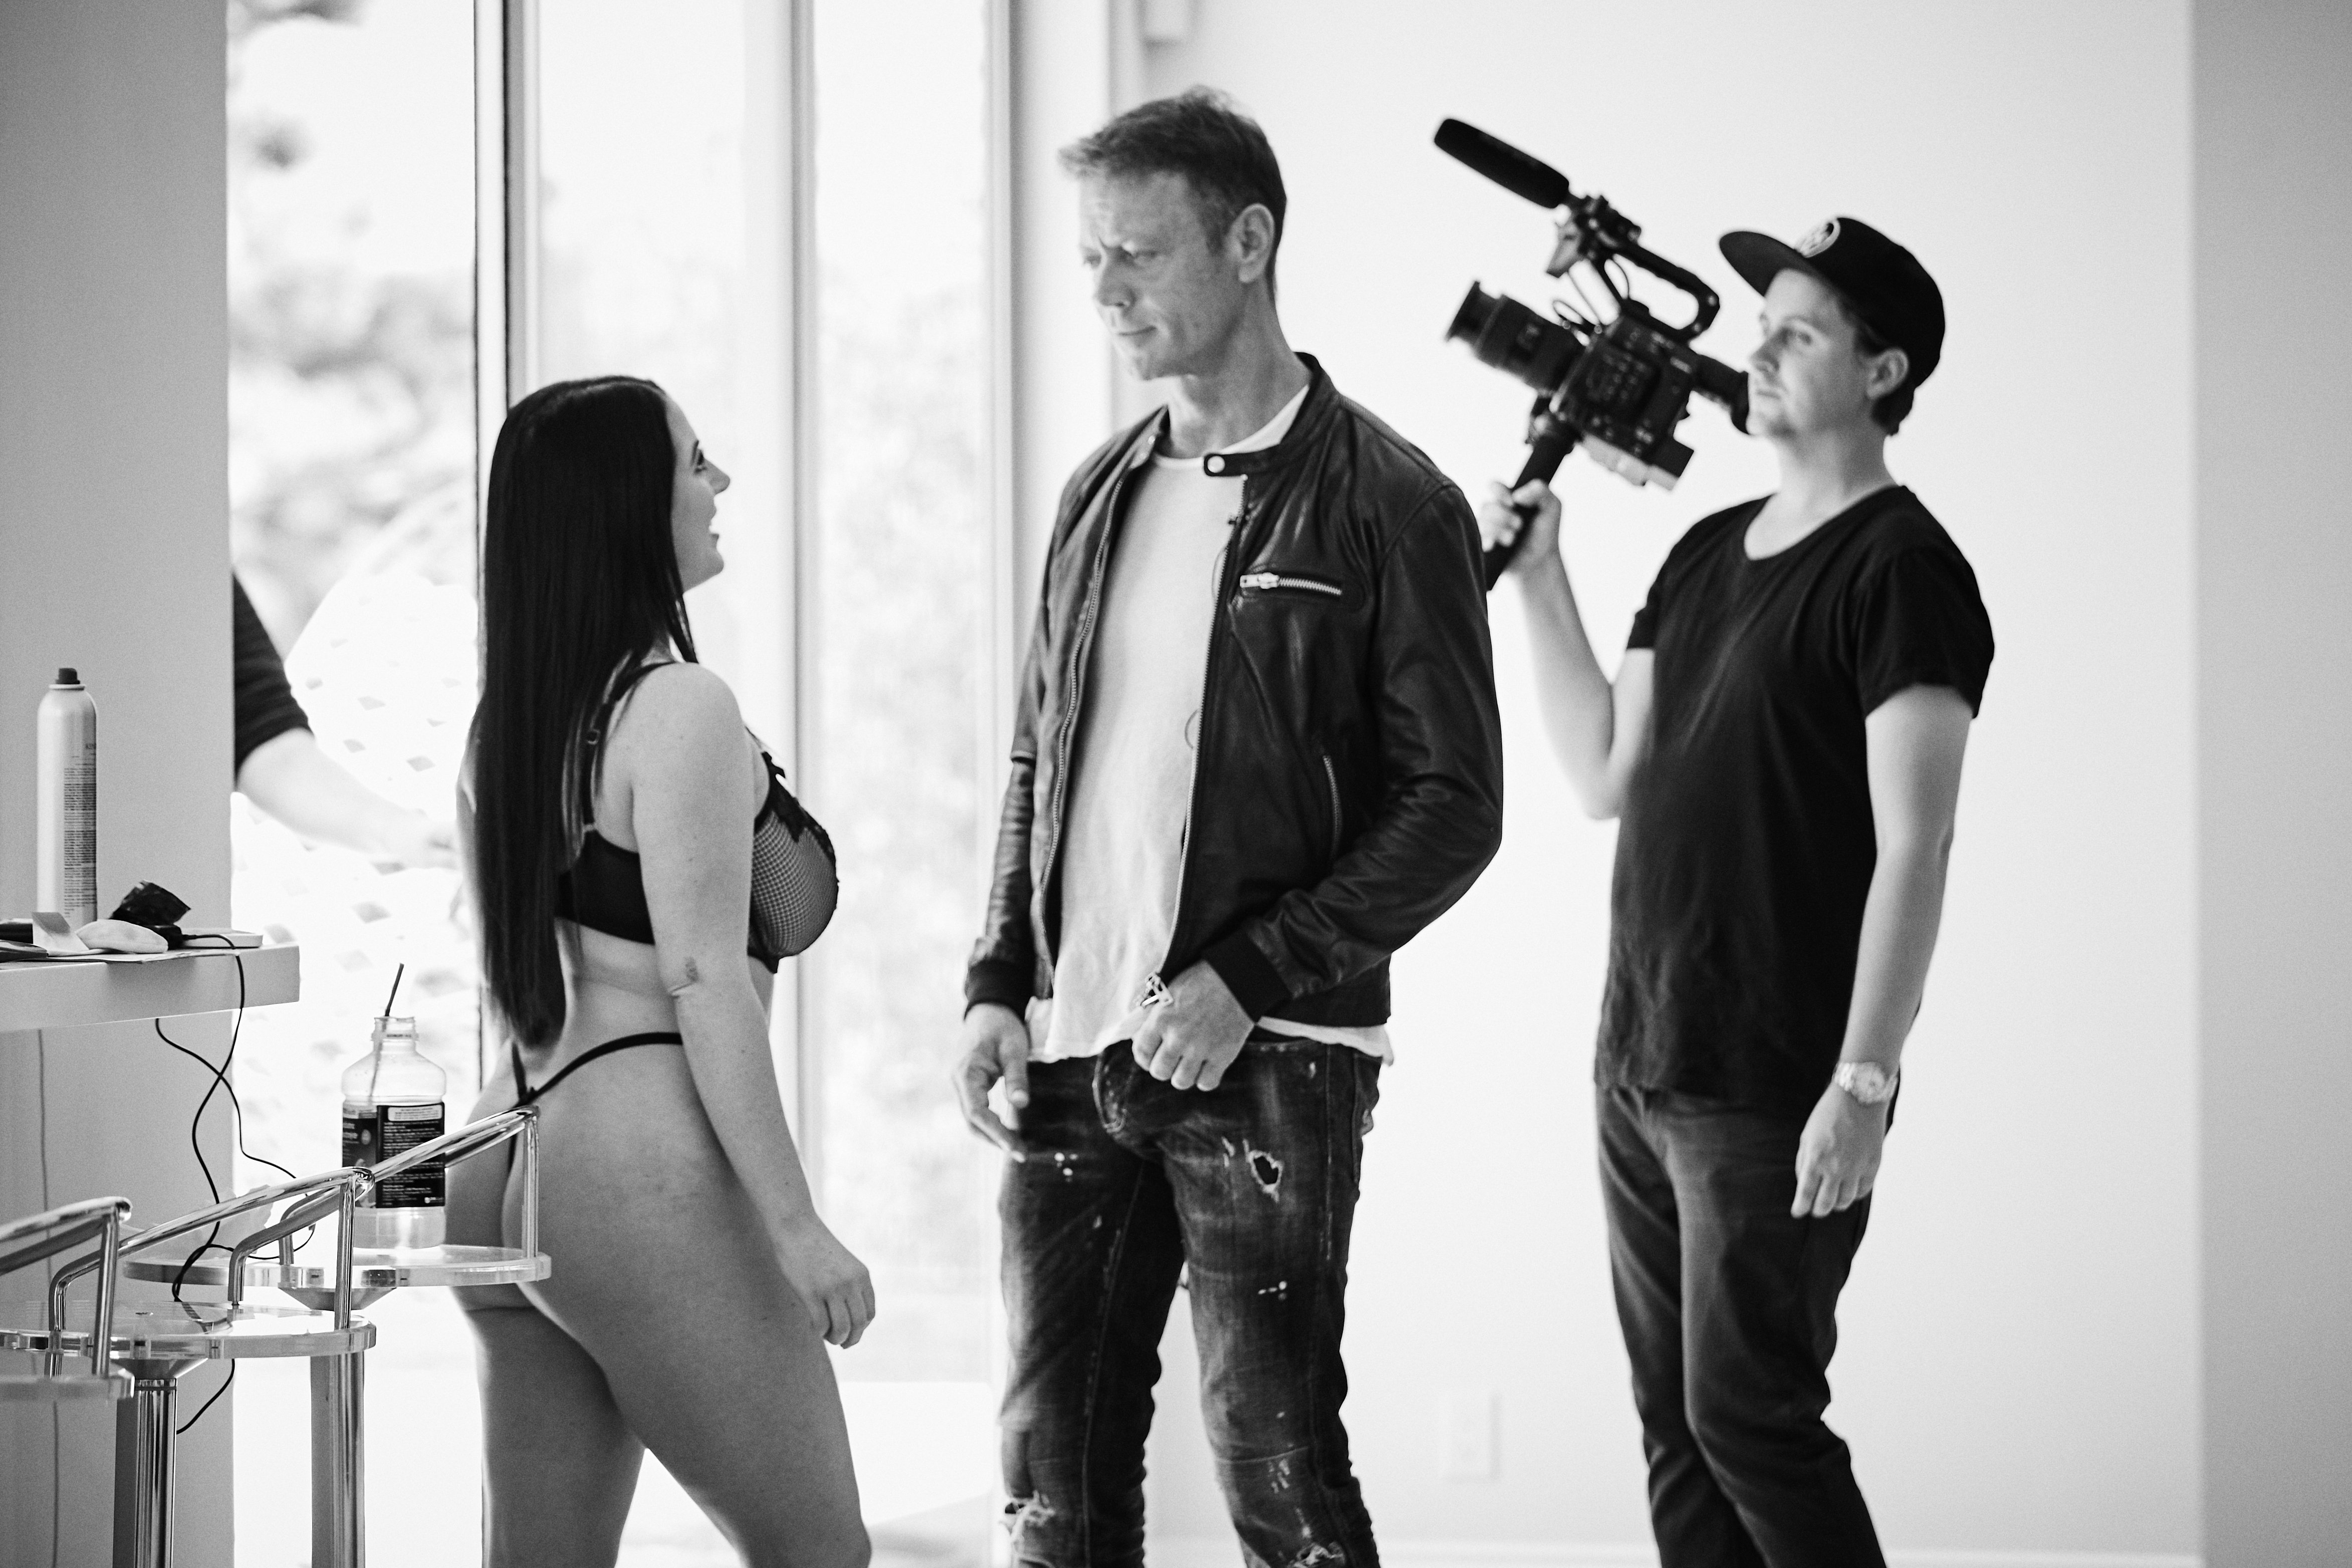 aaron paone recommends Angela White Rocco Siffredi